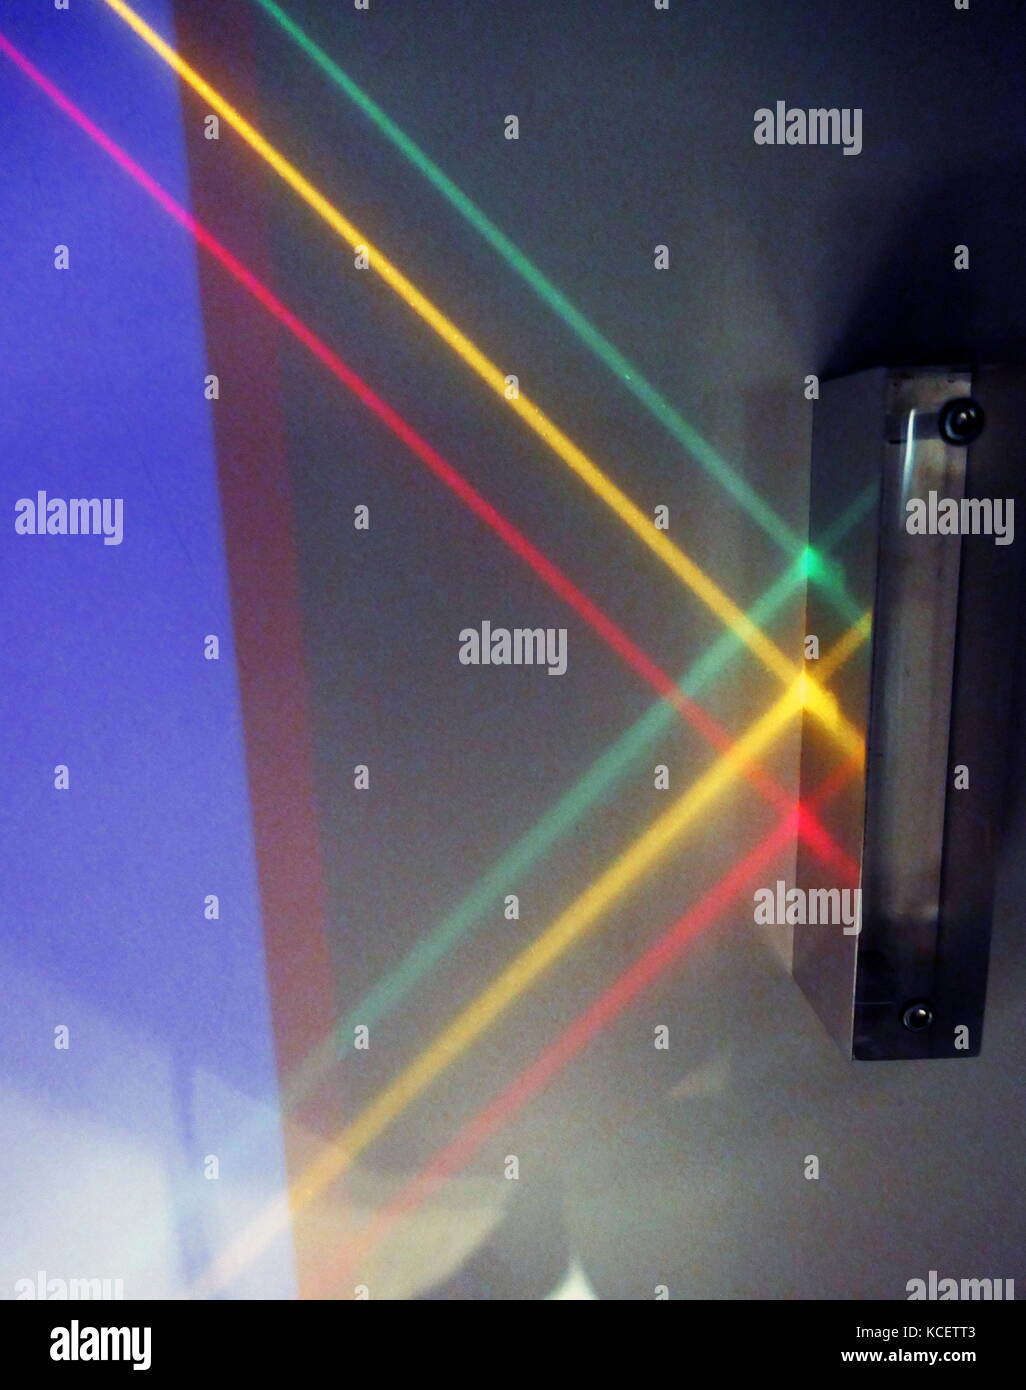 Three parallel beams of light are reflected off a mirrored surface: Reflection is the change in direction of a wave front at an interface between two different media so that the wave front returns into the medium from which it originated. Common examples include the reflection of light, sound and water waves. The law of reflection says that for specular reflection the angle at which the wave is incident on the surface equals the angle at which it is reflected. Mirrors exhibit specular reflection. Stock Photo